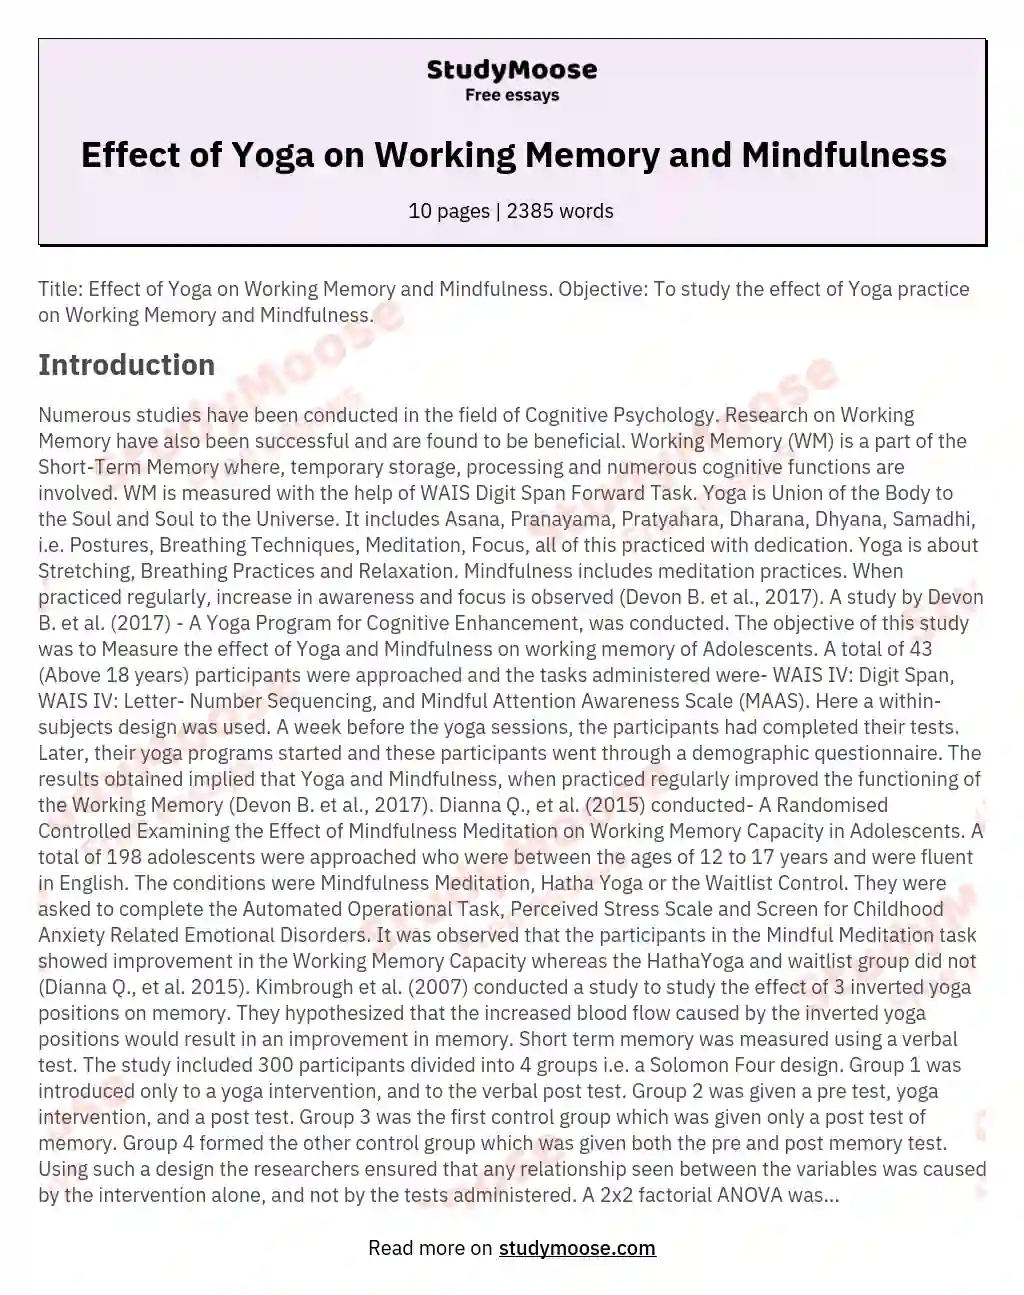 Effect of Yoga on Working Memory and Mindfulness essay